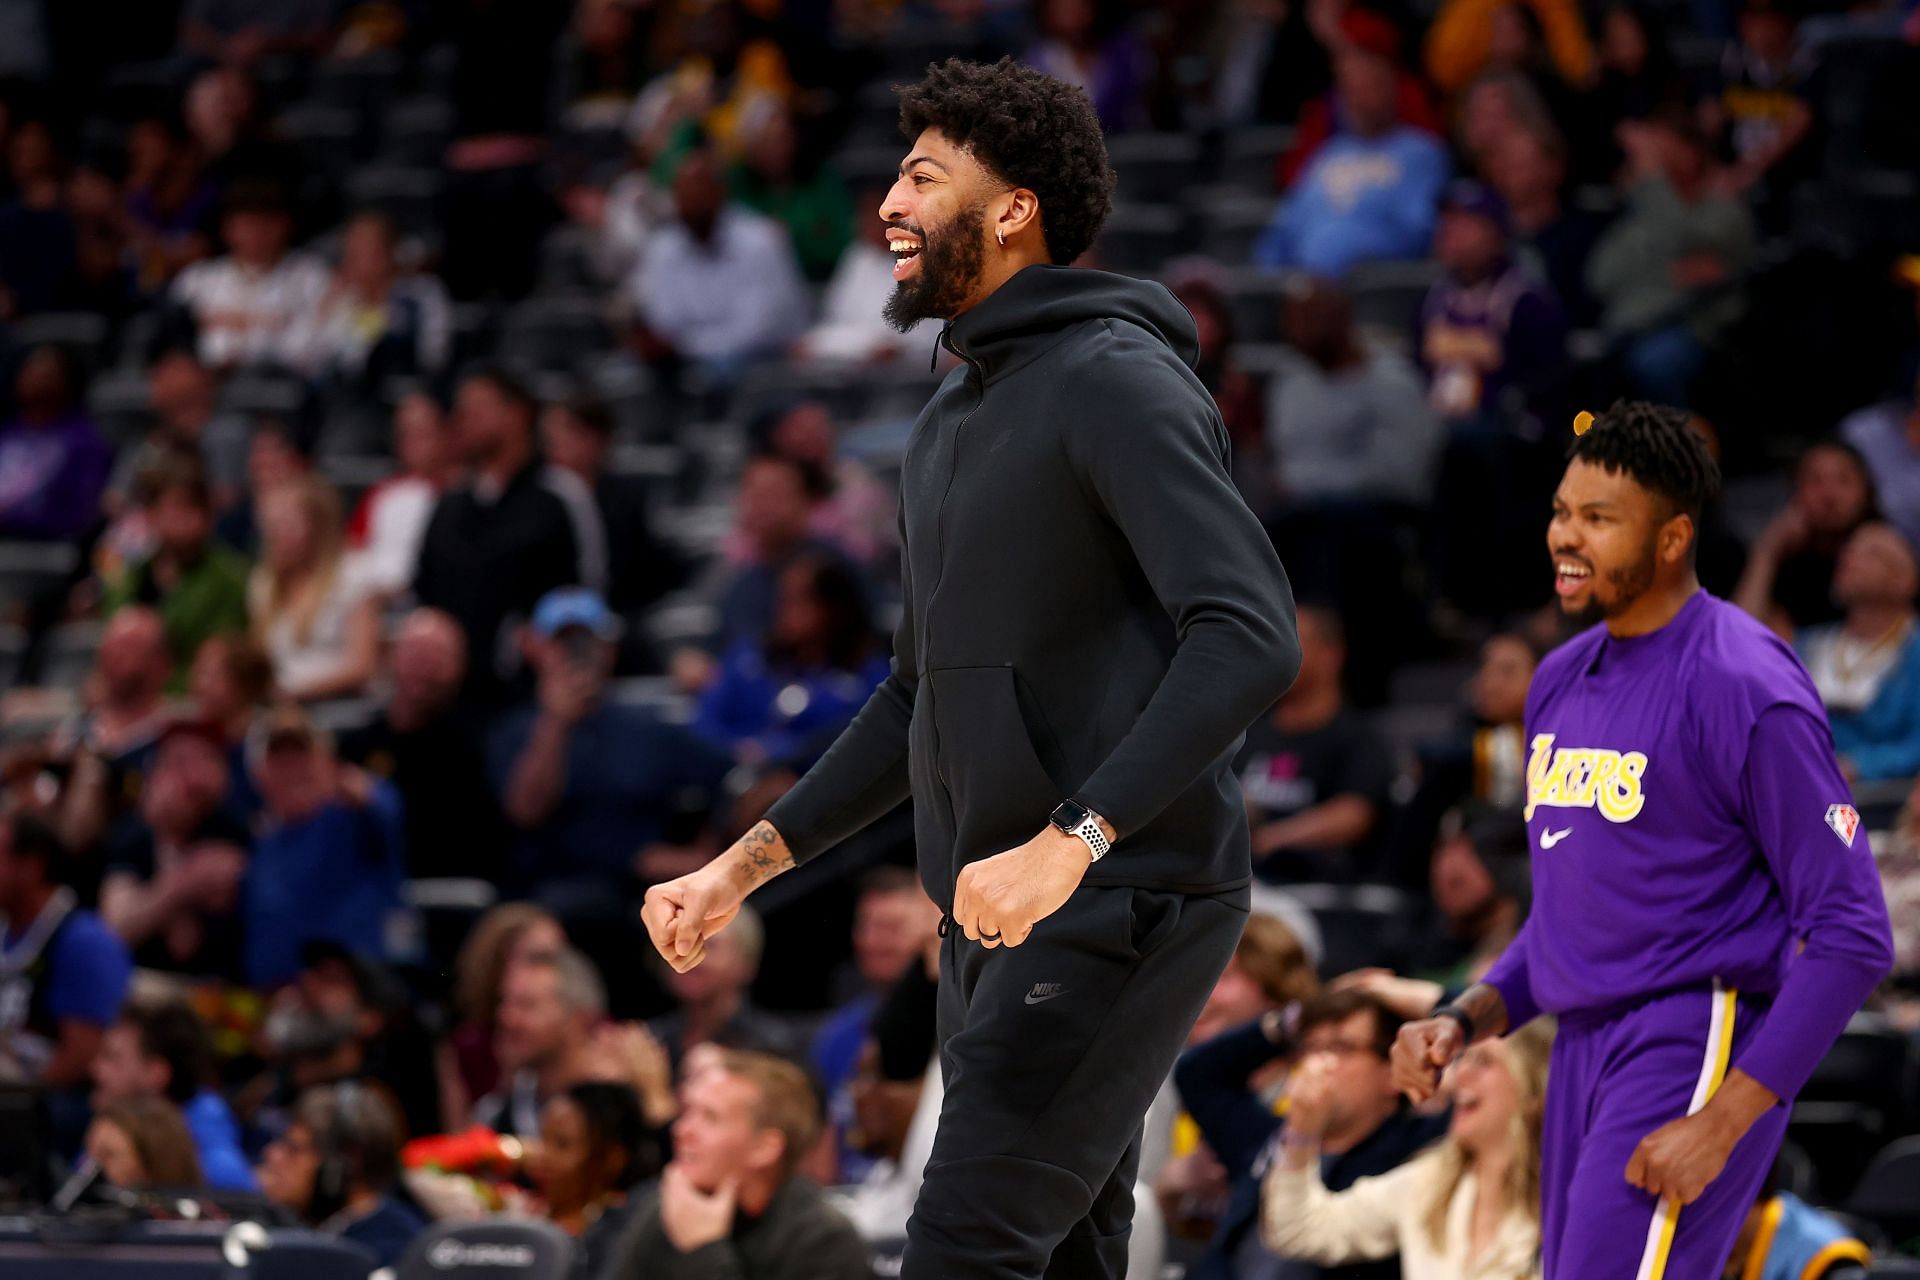 Anthony Davis has endured plenty of injuries since joining the Lakers